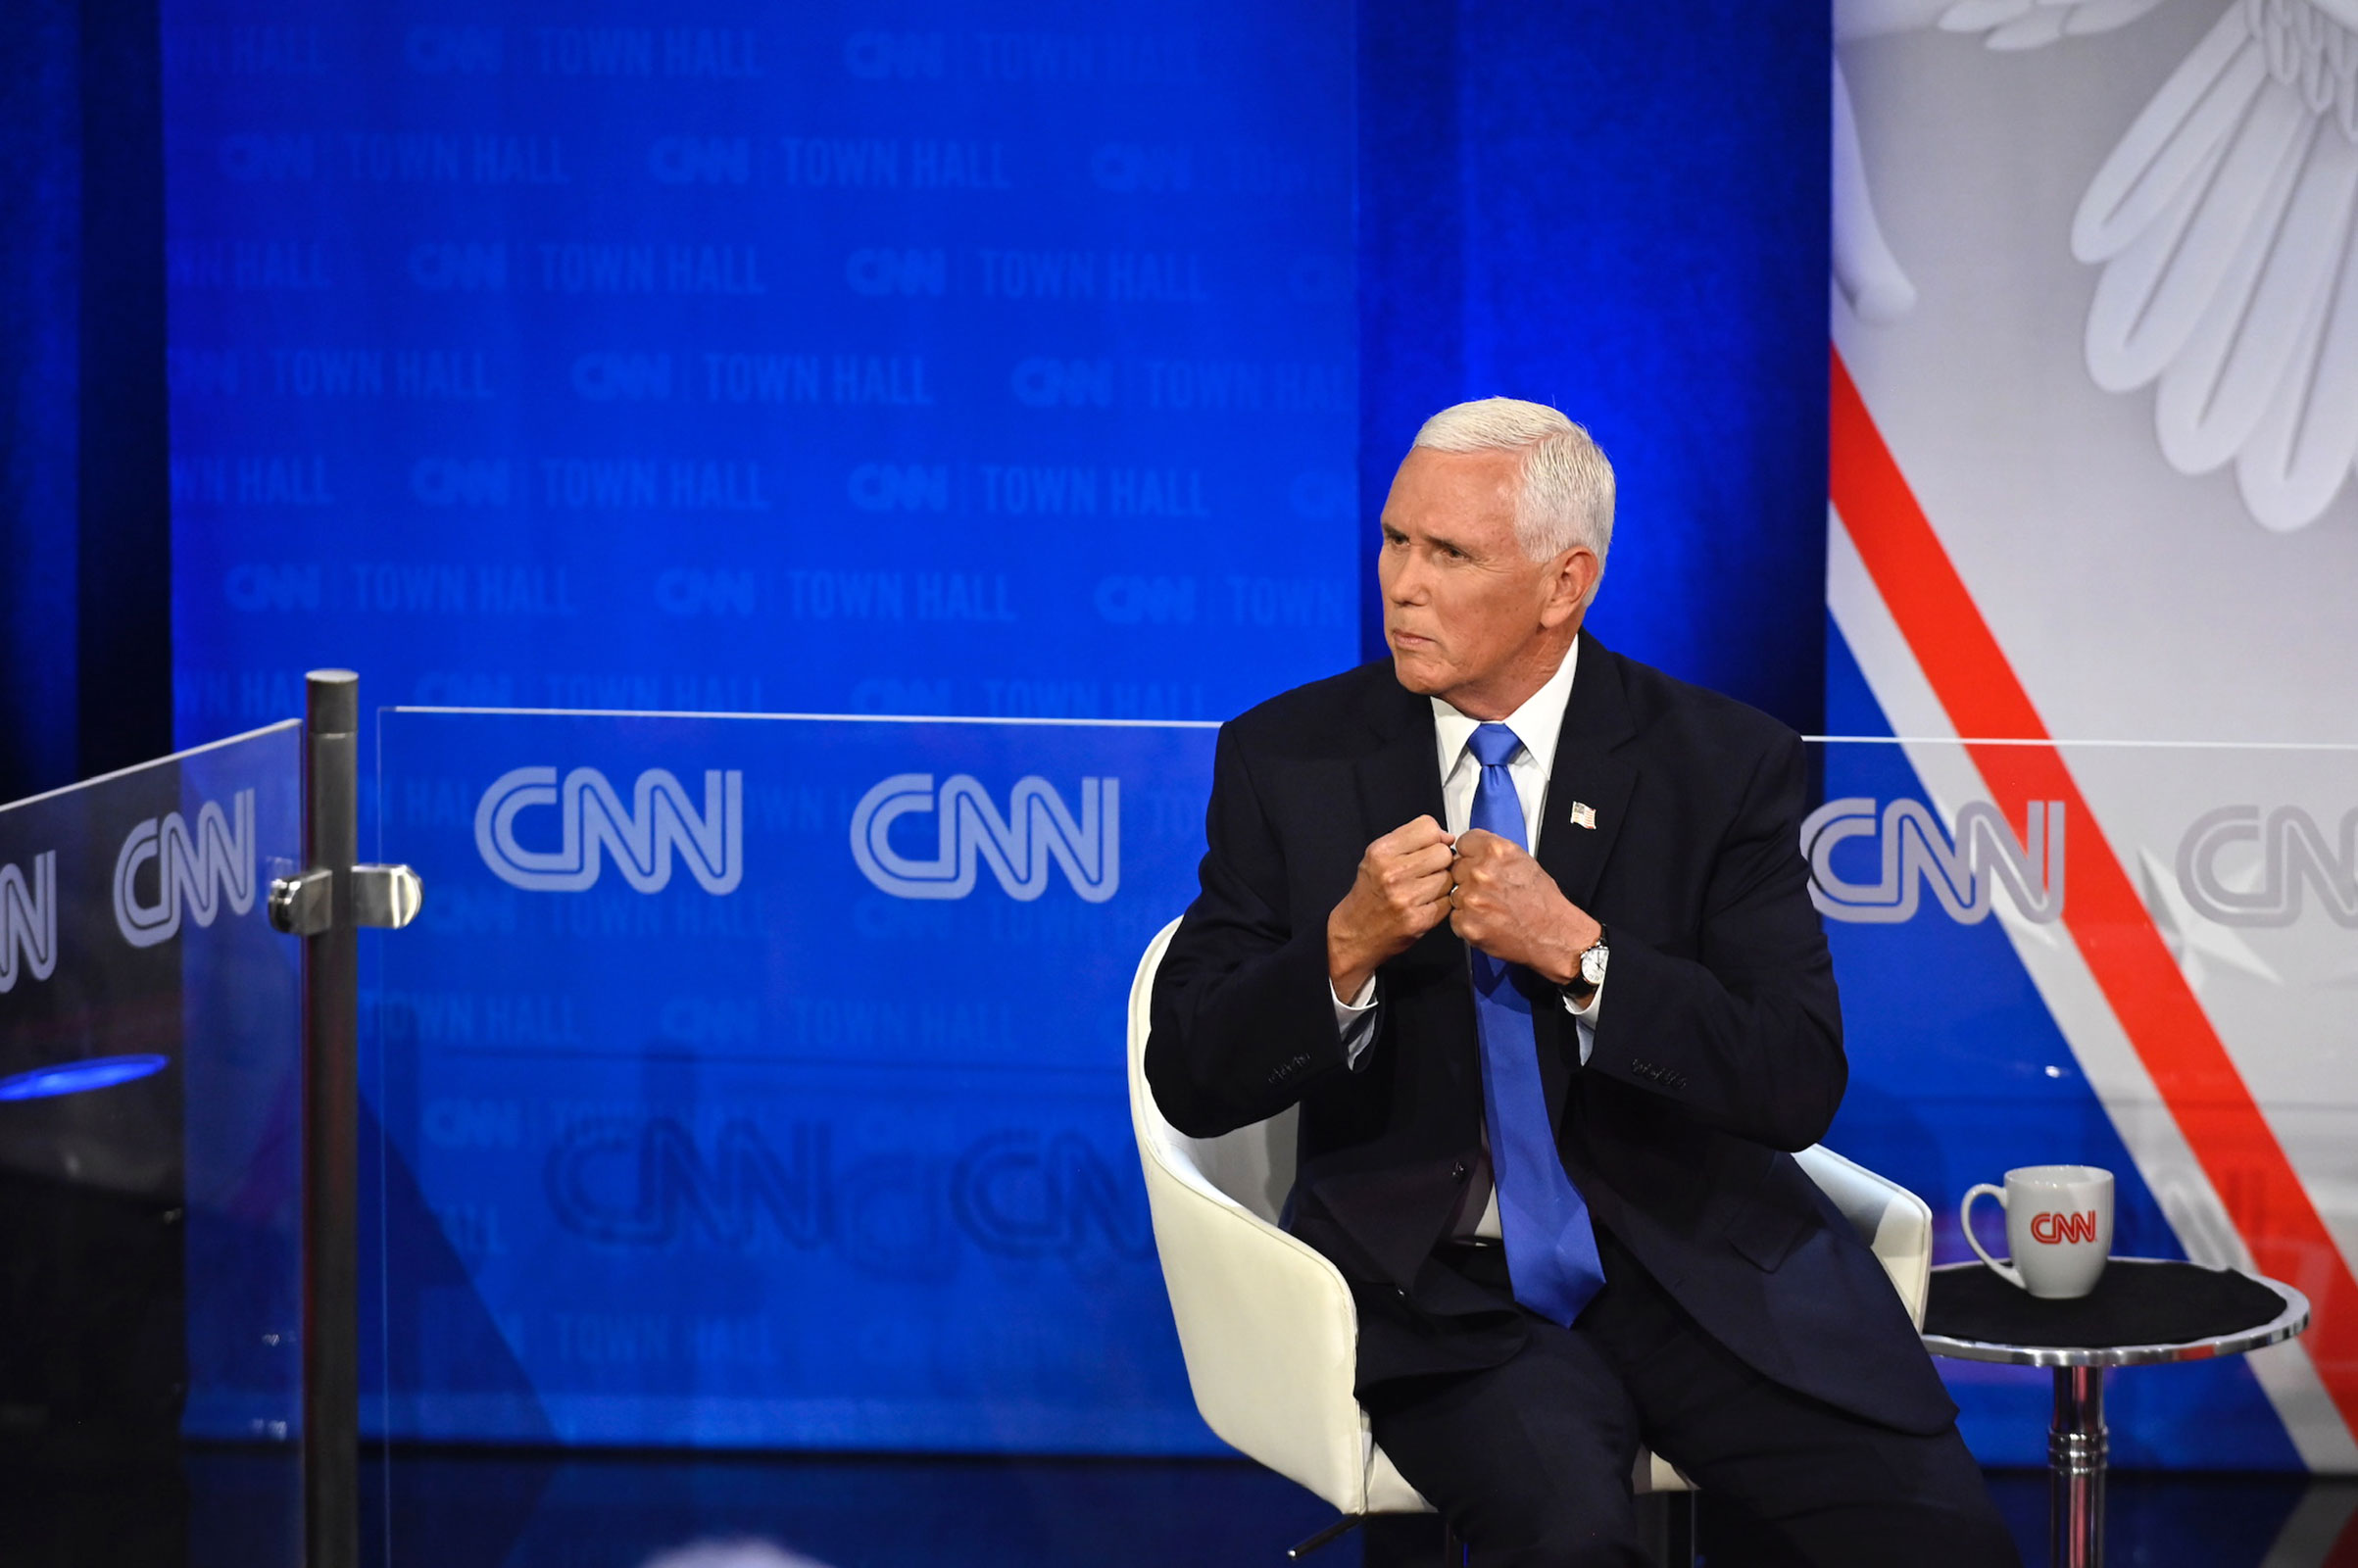 Former Vice President Mike Pence participates in a CNN Republican Presidential Town Hall moderated by CNN’s Dana Bash at Grand View University in Des Moines, Iowa, on Wednesday.